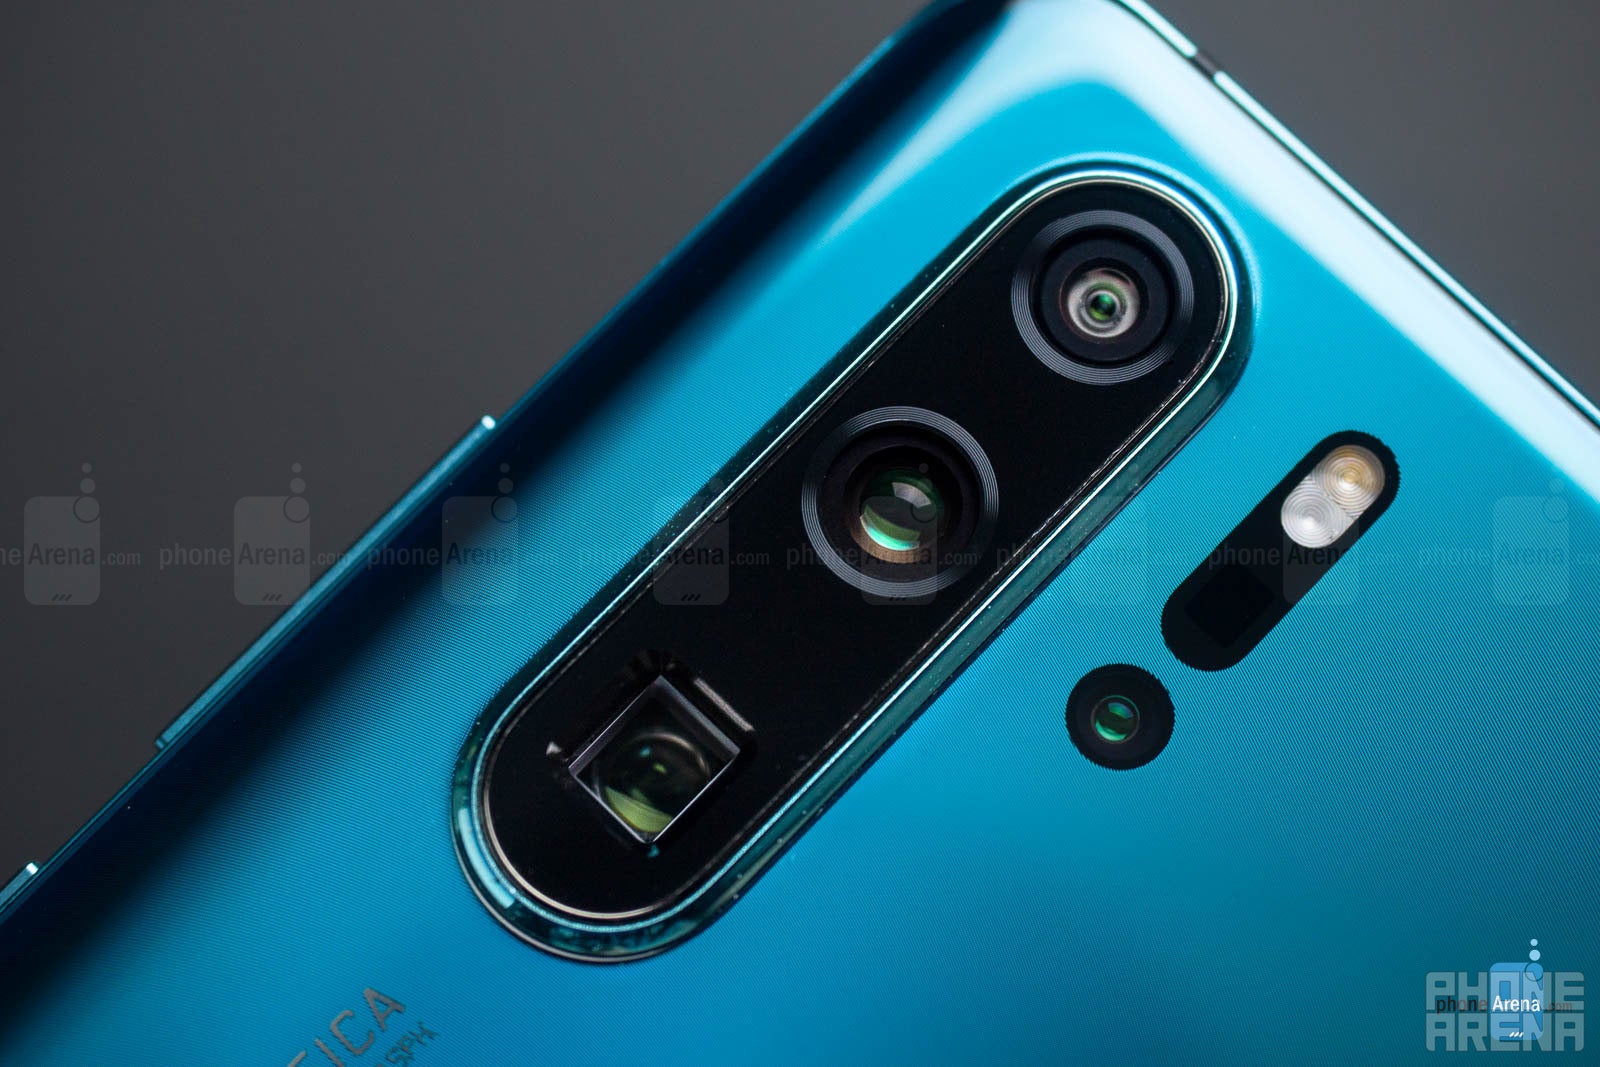 Huawei&#039;s P30 Pro has four cameras on its back - Samsung and Huawei significantly outspend Apple on camera components